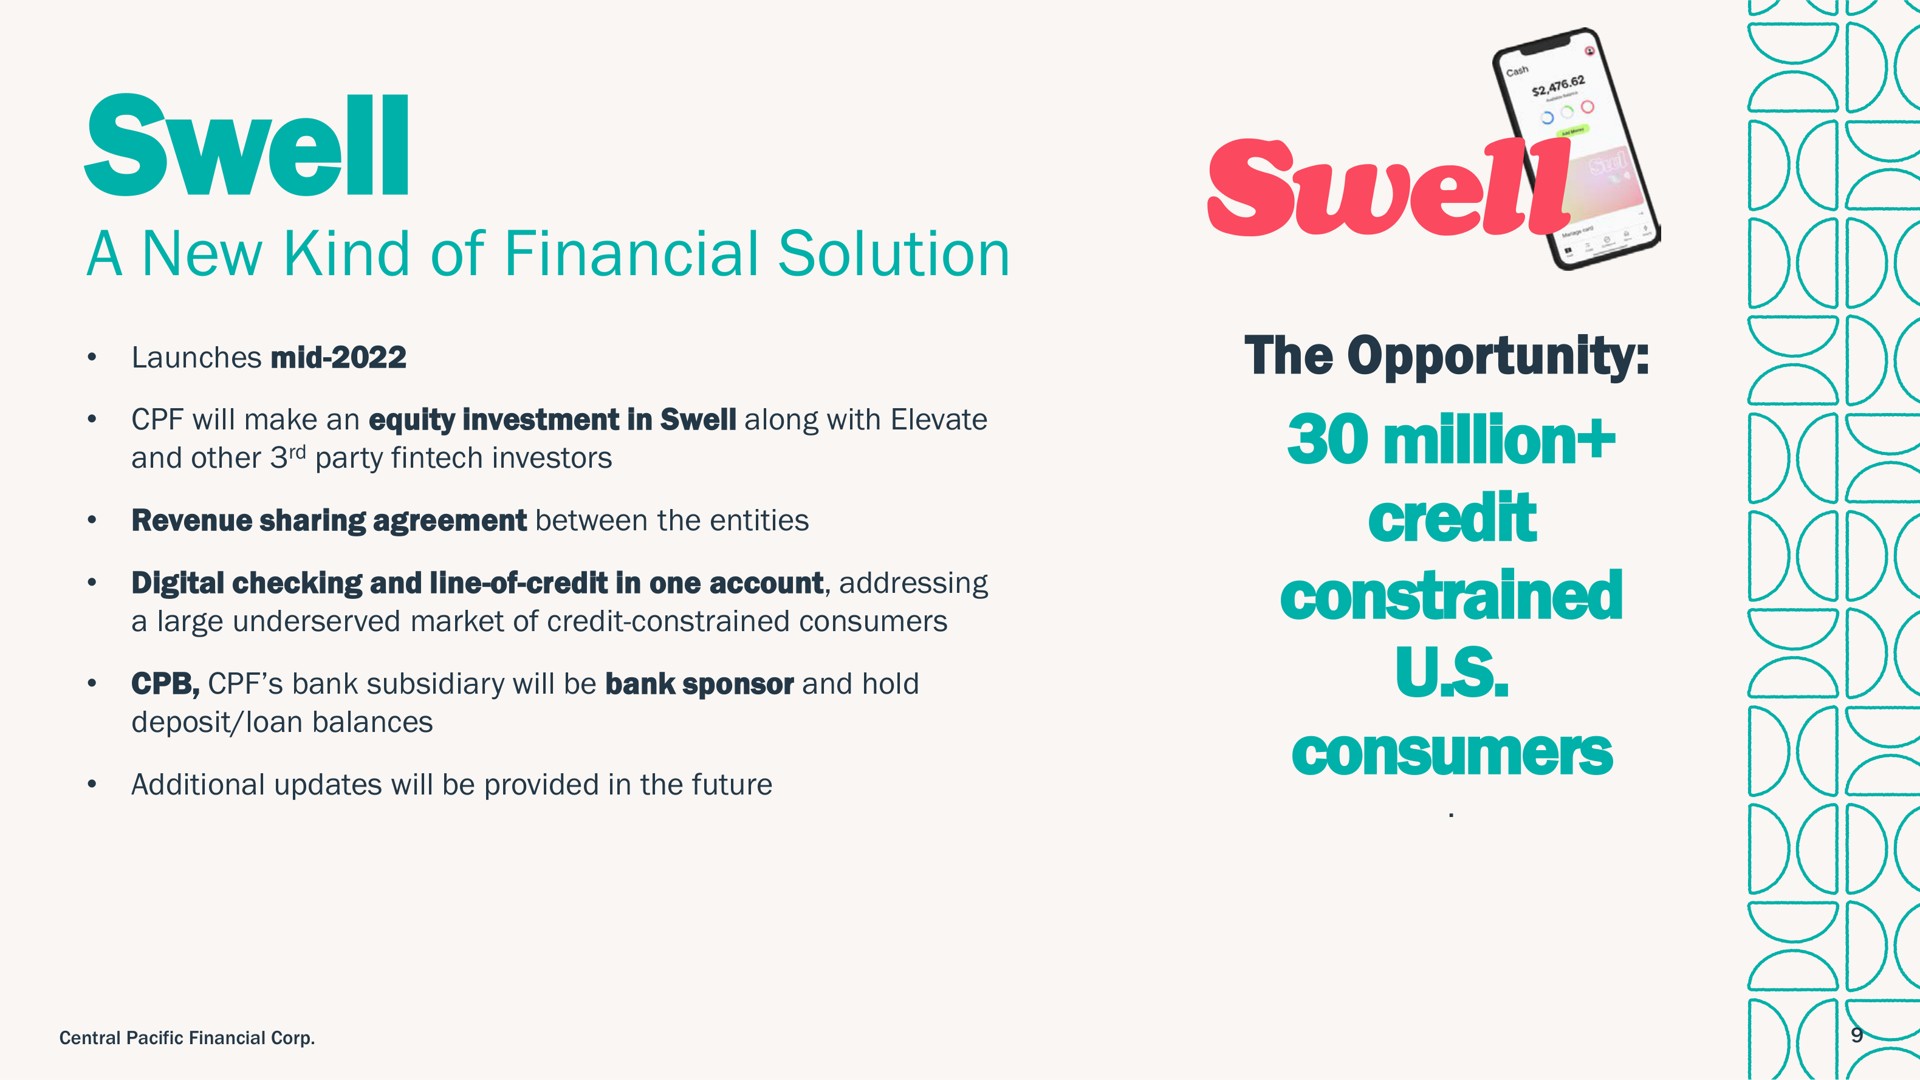 swell a new kind of financial solution million credit constrained consumers | Central Pacific Financial